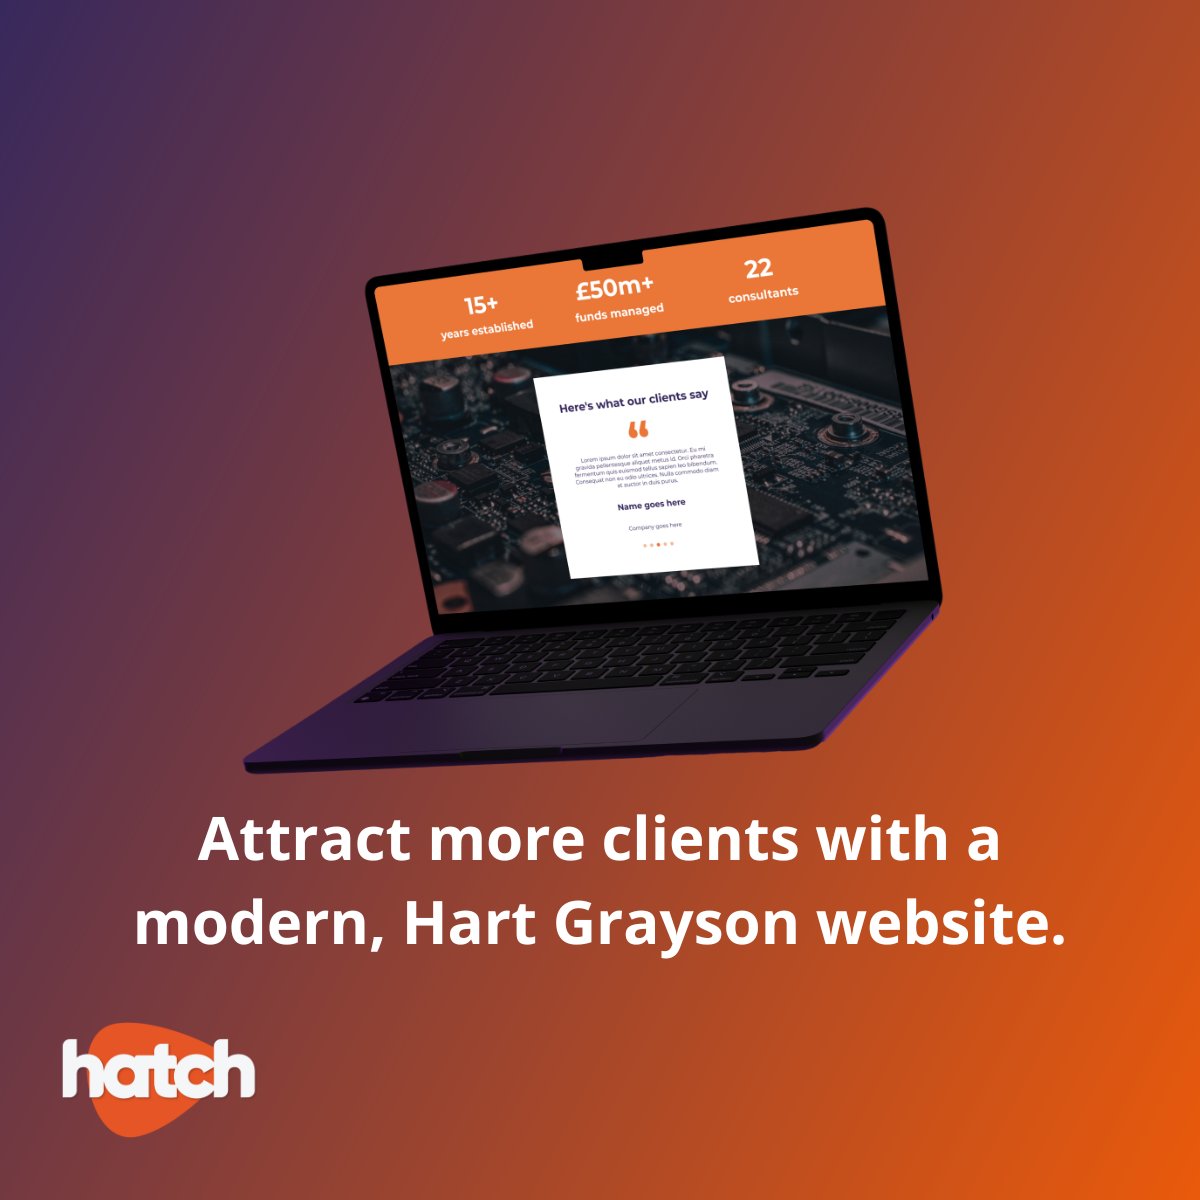 💡Is your financial advice business hindered by an outdated website?

With Hatch, get a modern, cost-effective solution for just £1,000. Impress clients, save time and stay ahead. 

👉 See how it works: bit.ly/3xsE6Pk

#FinancialAdvisers #WealthManagers